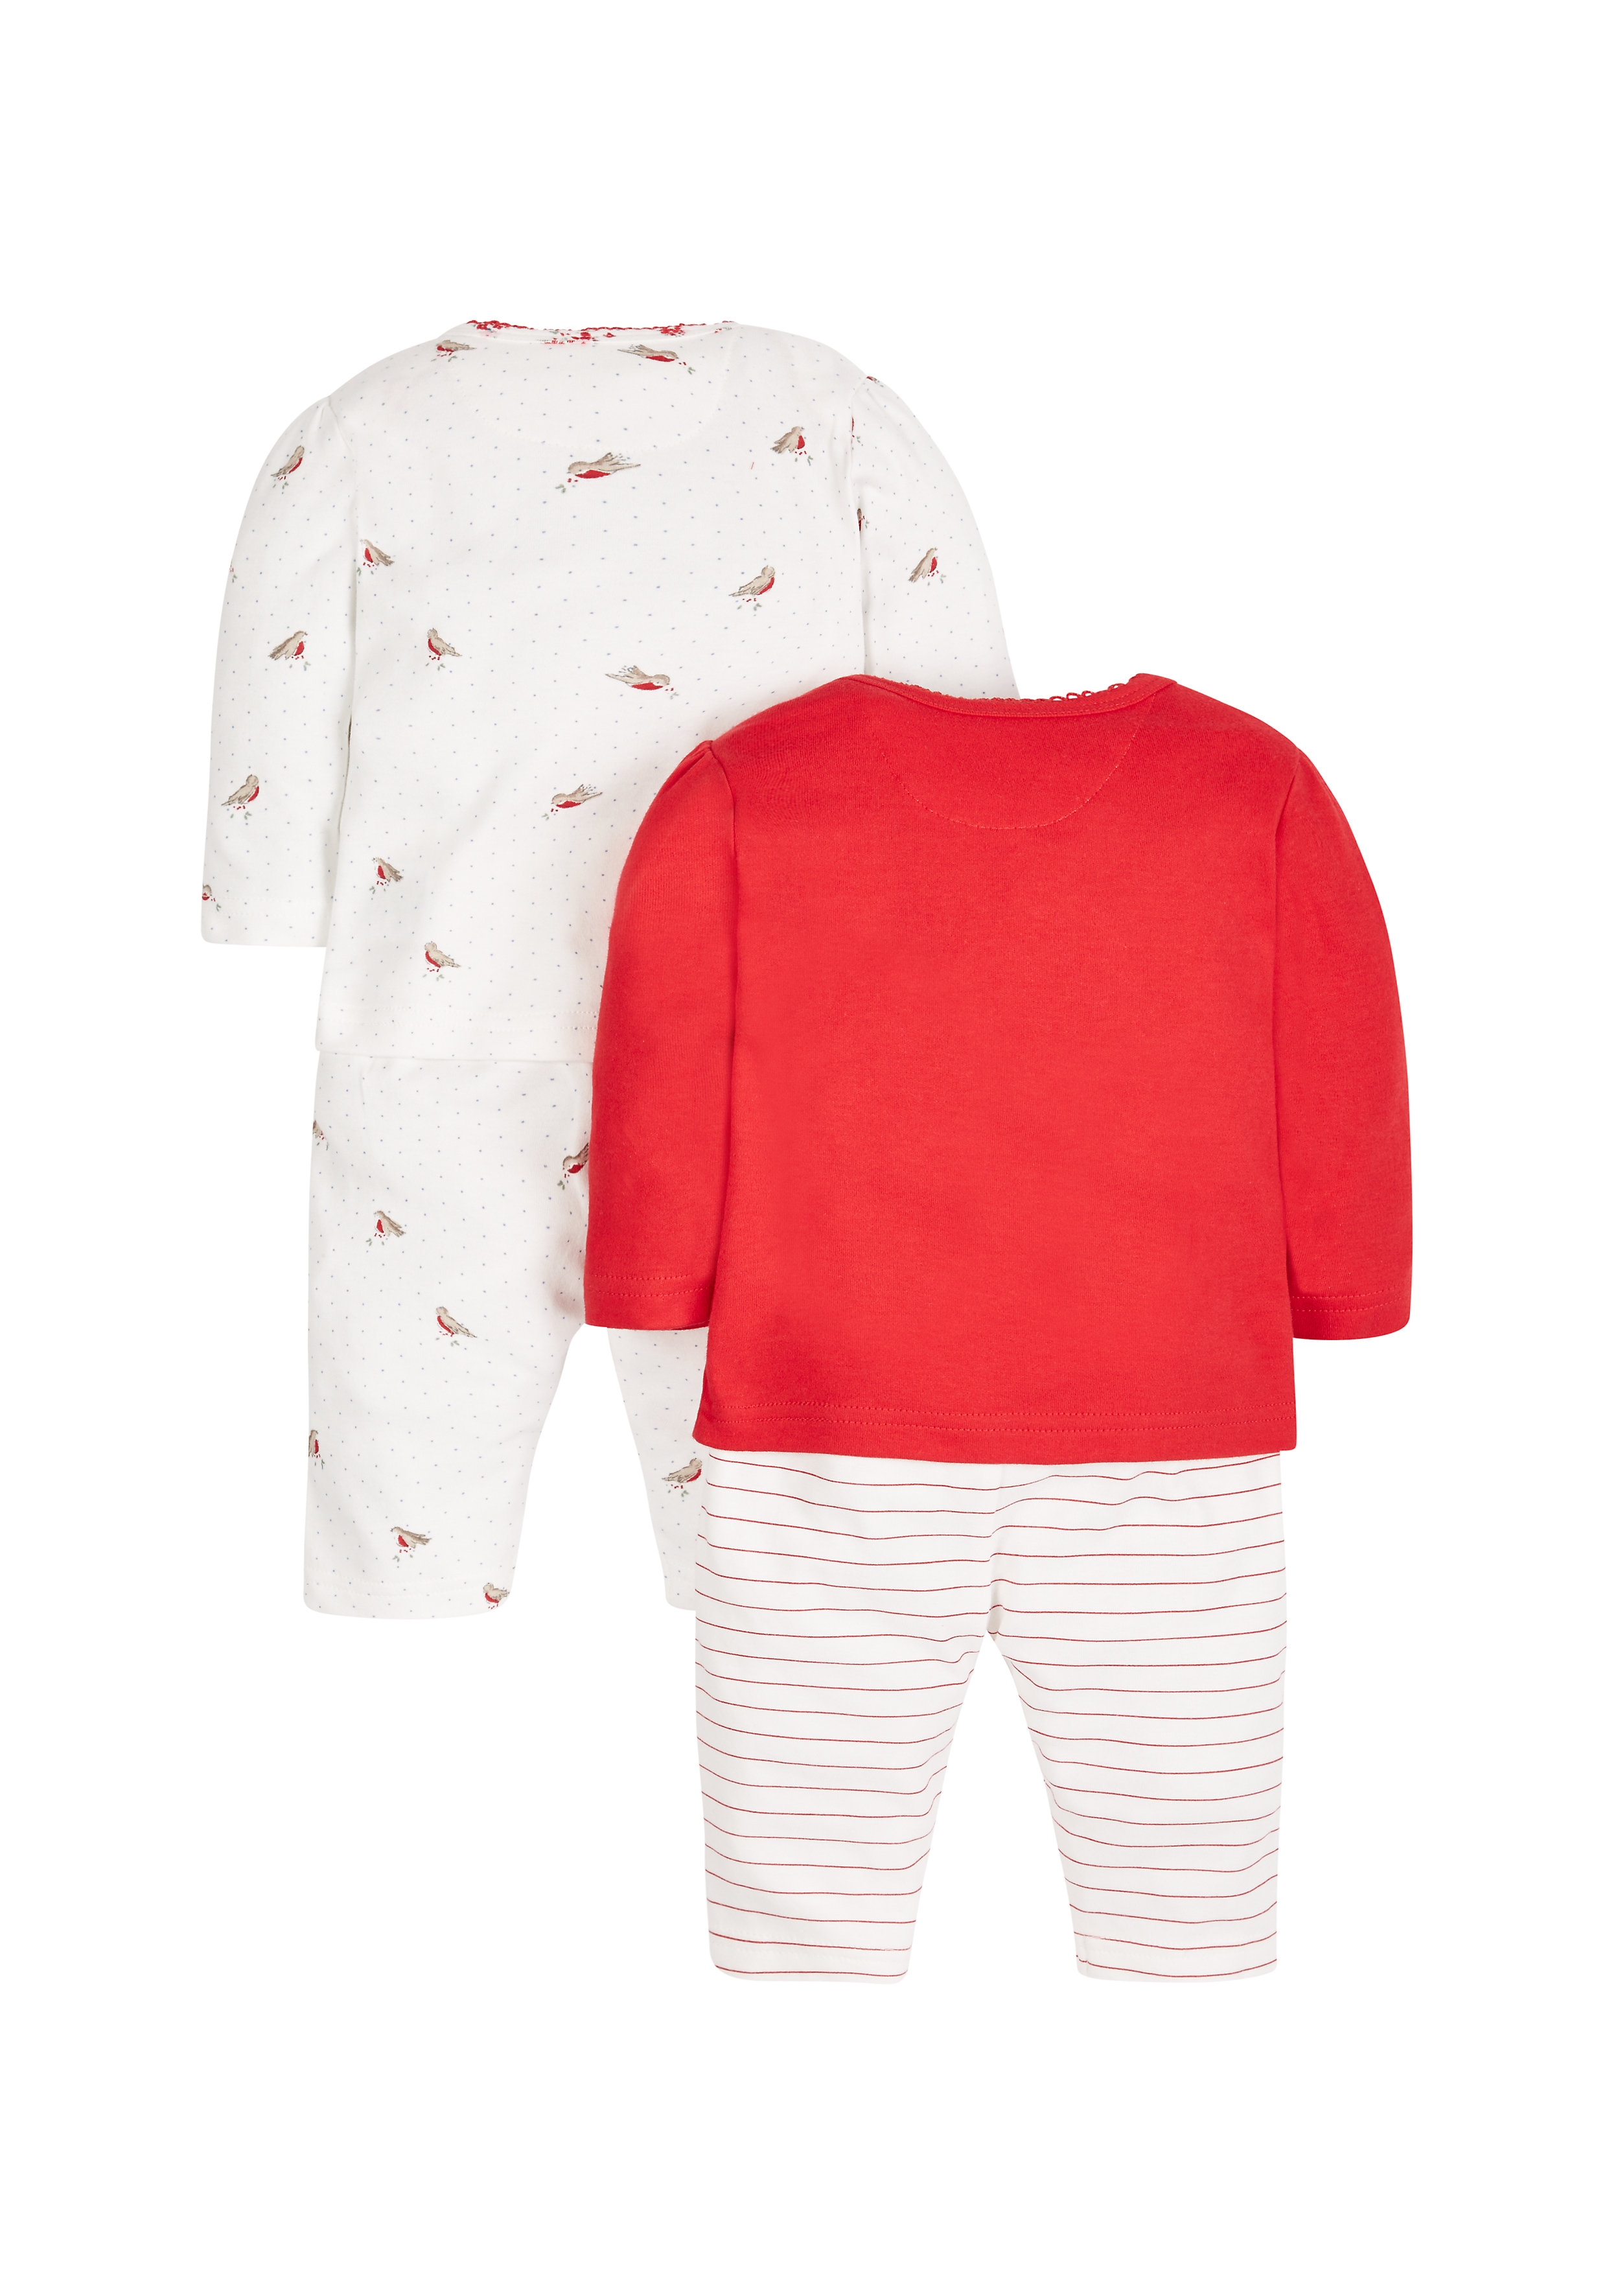 Mothercare | Girls Full Sleeves Pyjama Set Embroidered - Pack Of 2 - Red 1